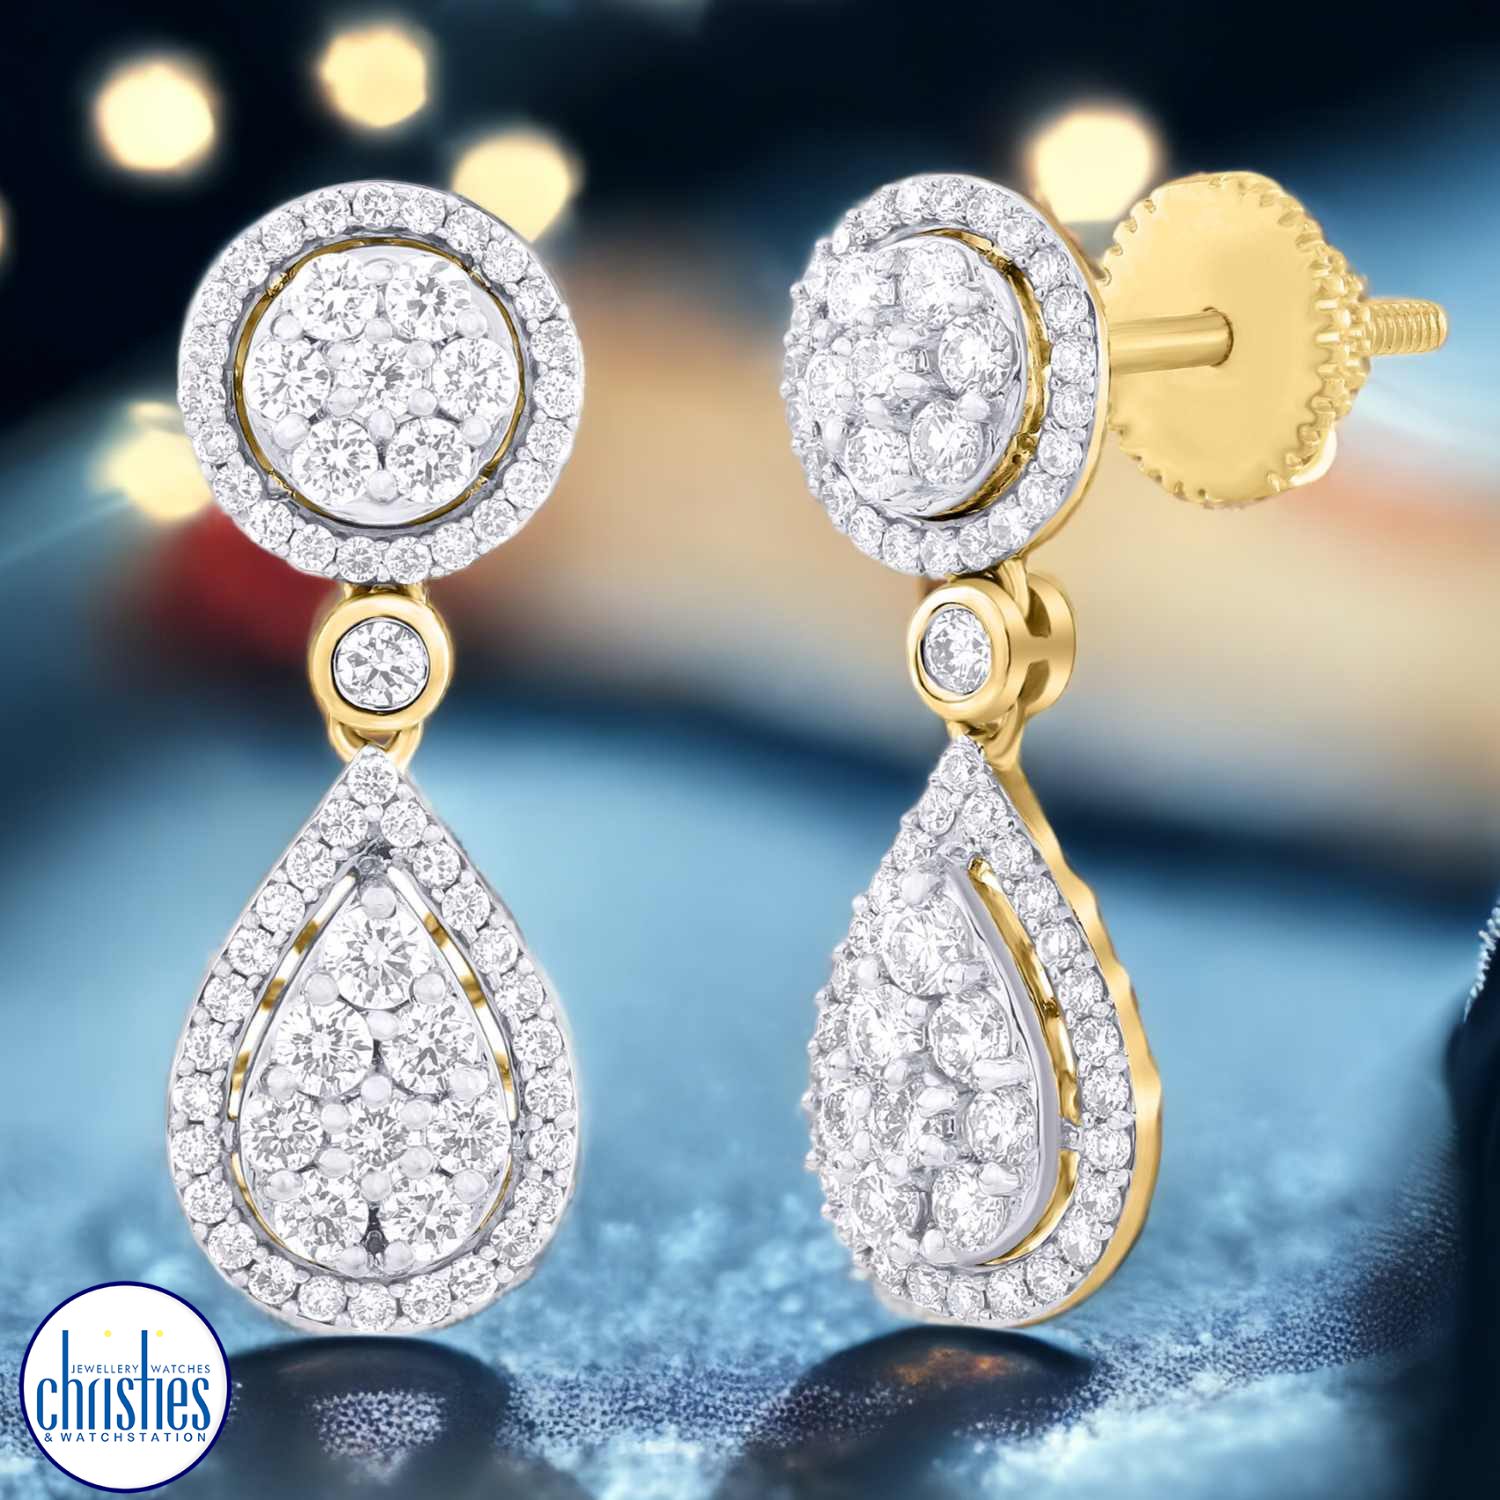 Sparkling 18CT Gold Diamond Earrings TDW 0.79CT Plu: 27249| Shop Now at Christies ER116171Y18DI1 Watches NZ